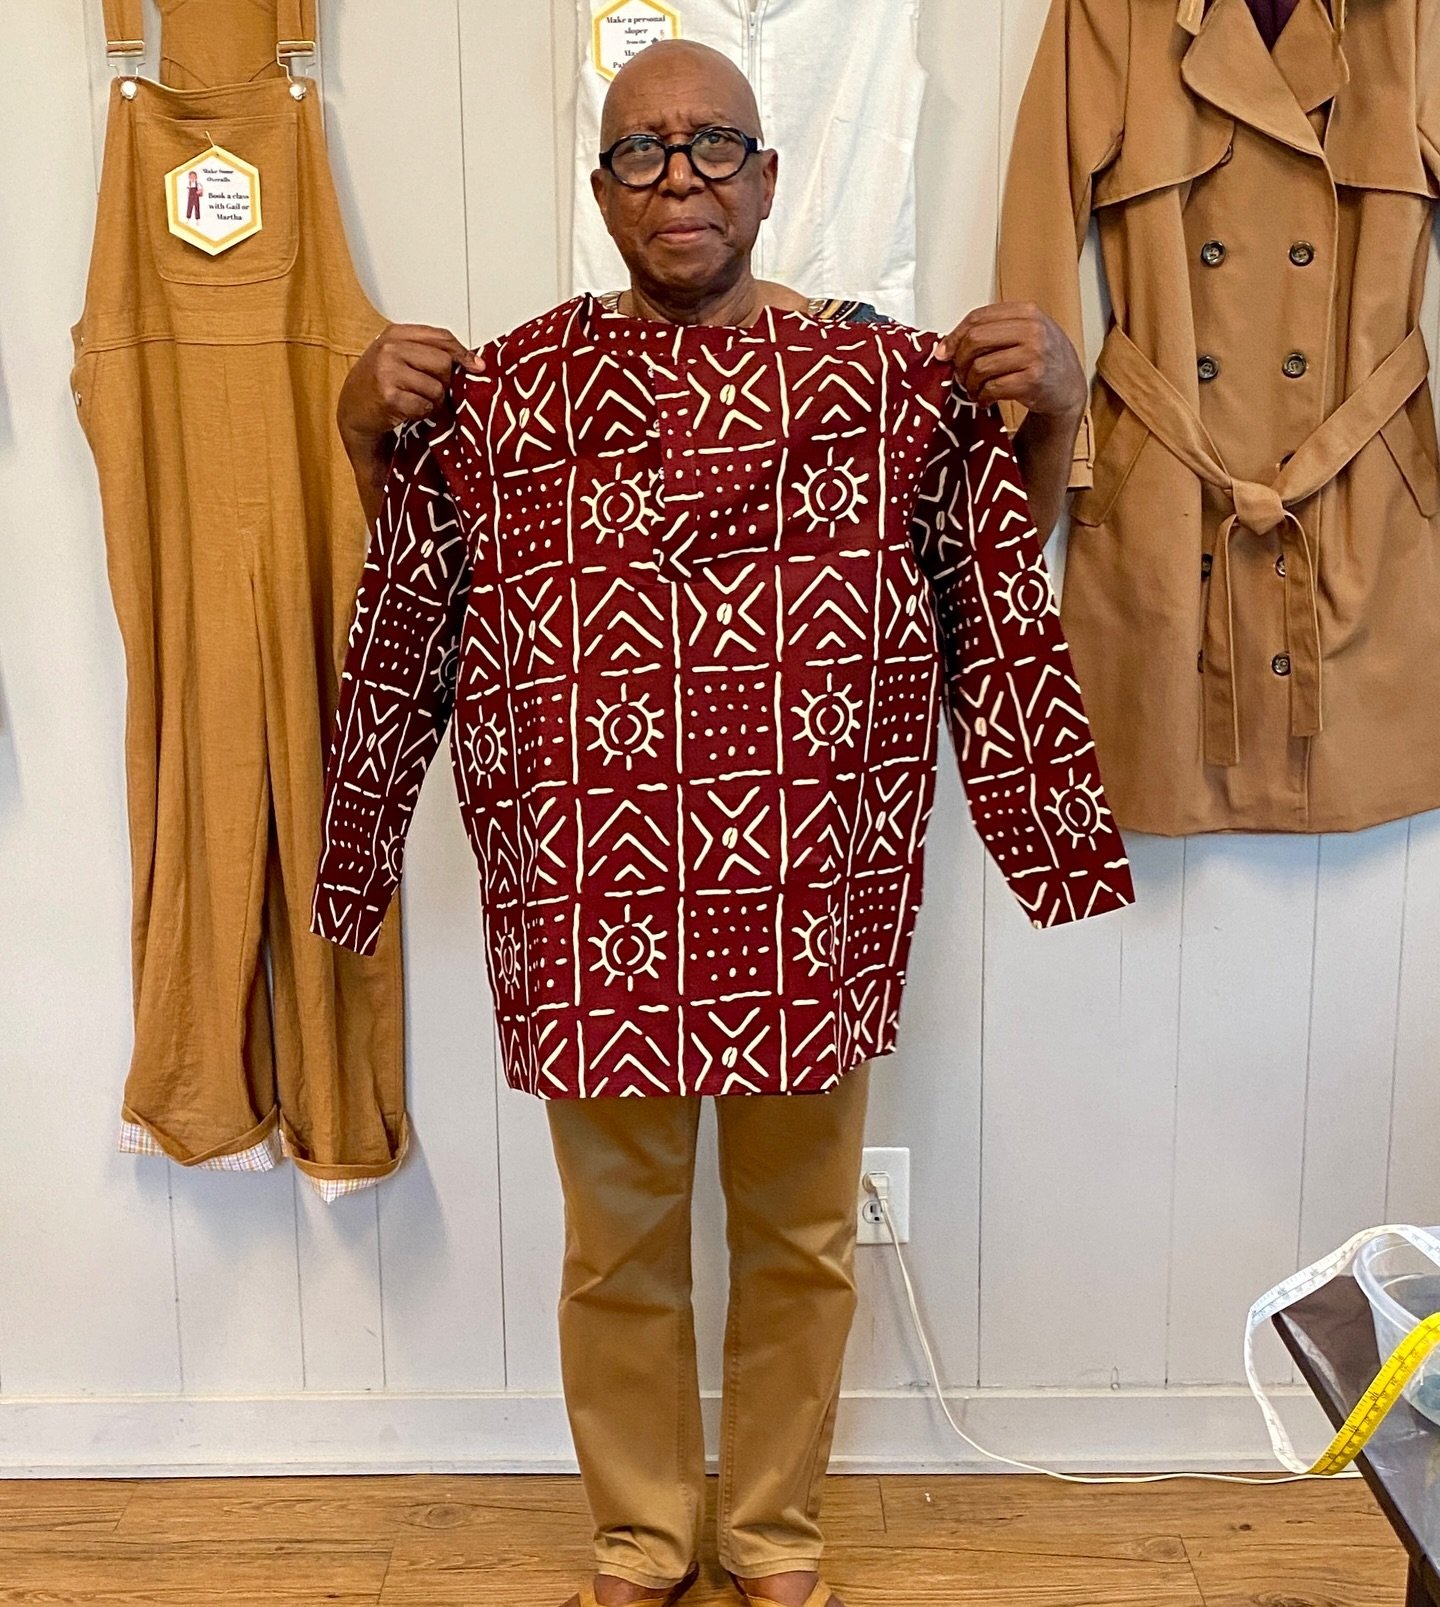 This gentleman comes into the studio weekly-ish to grow his skills to make shirts, accessories, and decor to show his unique style! Pretty impressive, right! #greatjob #proudofyou #memade #personaldesign #thisisyou #loveyourself #resistfastfashion #s